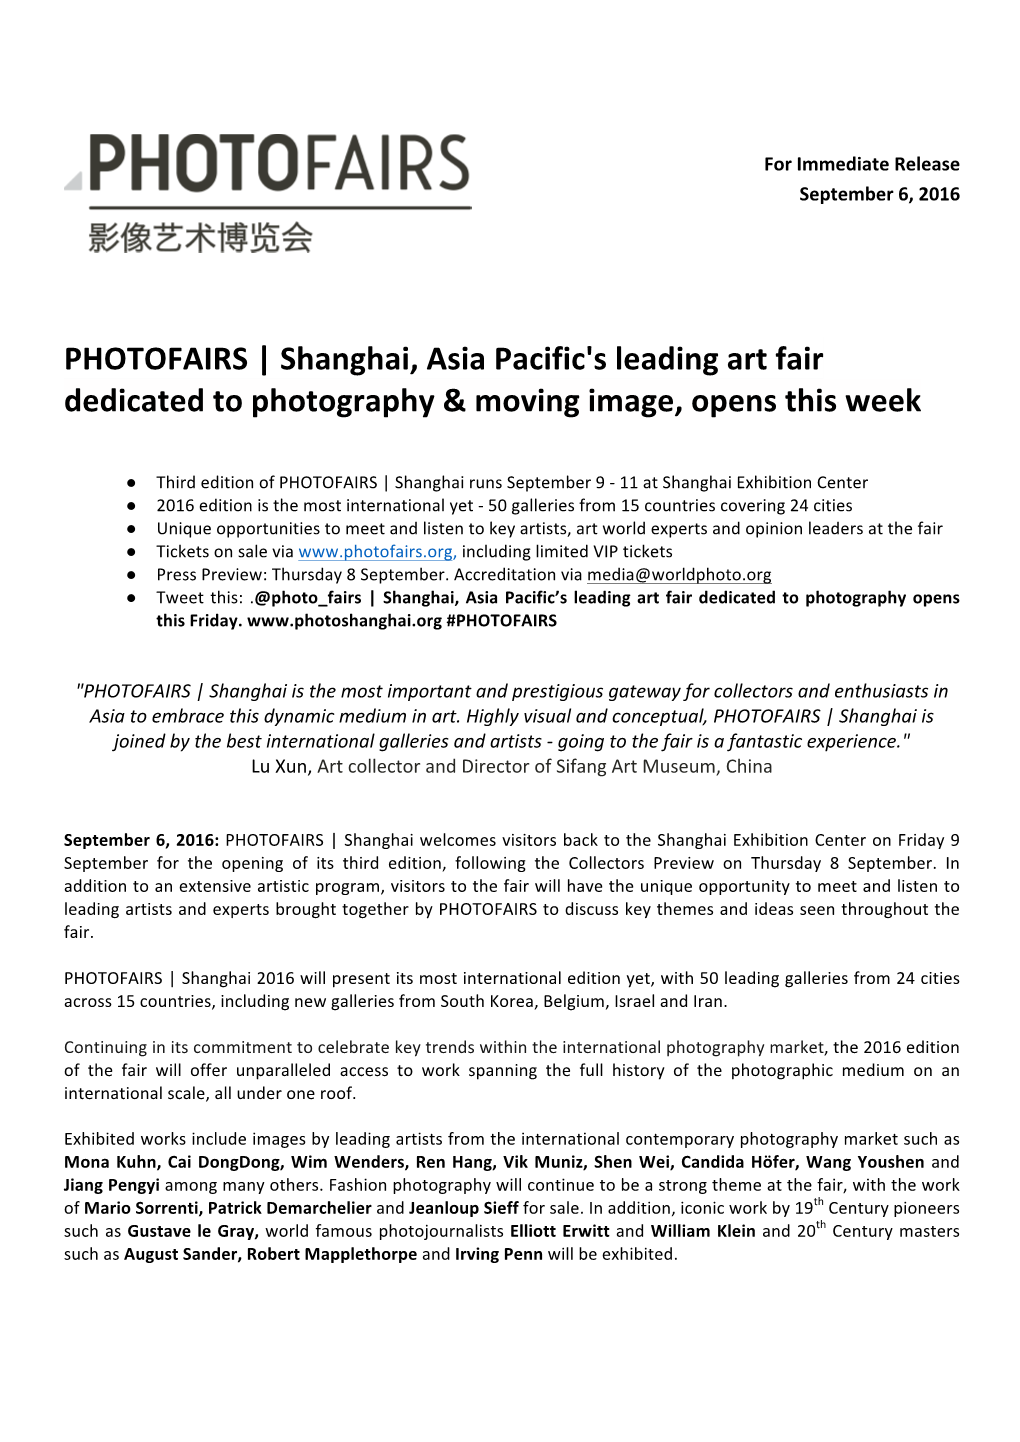 Shanghai, Asia Pacific's Leading Art Fair Dedicated to Photography & Moving Image, Opens This Week